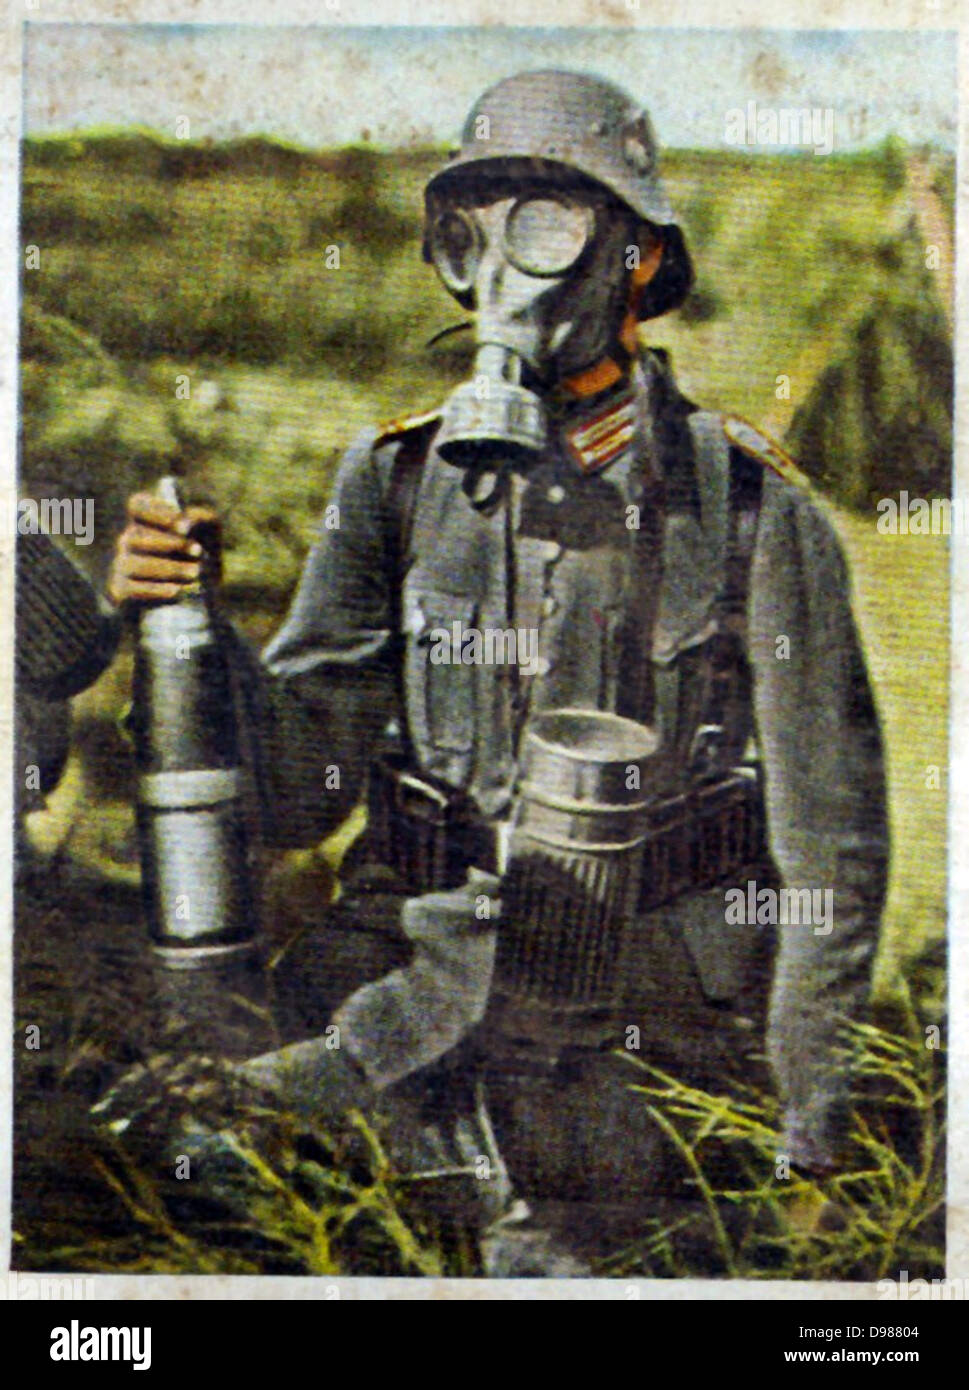 German re-armament and militarisation: Chemical warfare preparation. A gunner, holding a shell, on exercises wearing a gasmask. From series of 270 cigarette cards 'Die Deutsche Wehrmacht', Dresden, 1936. Stock Photo